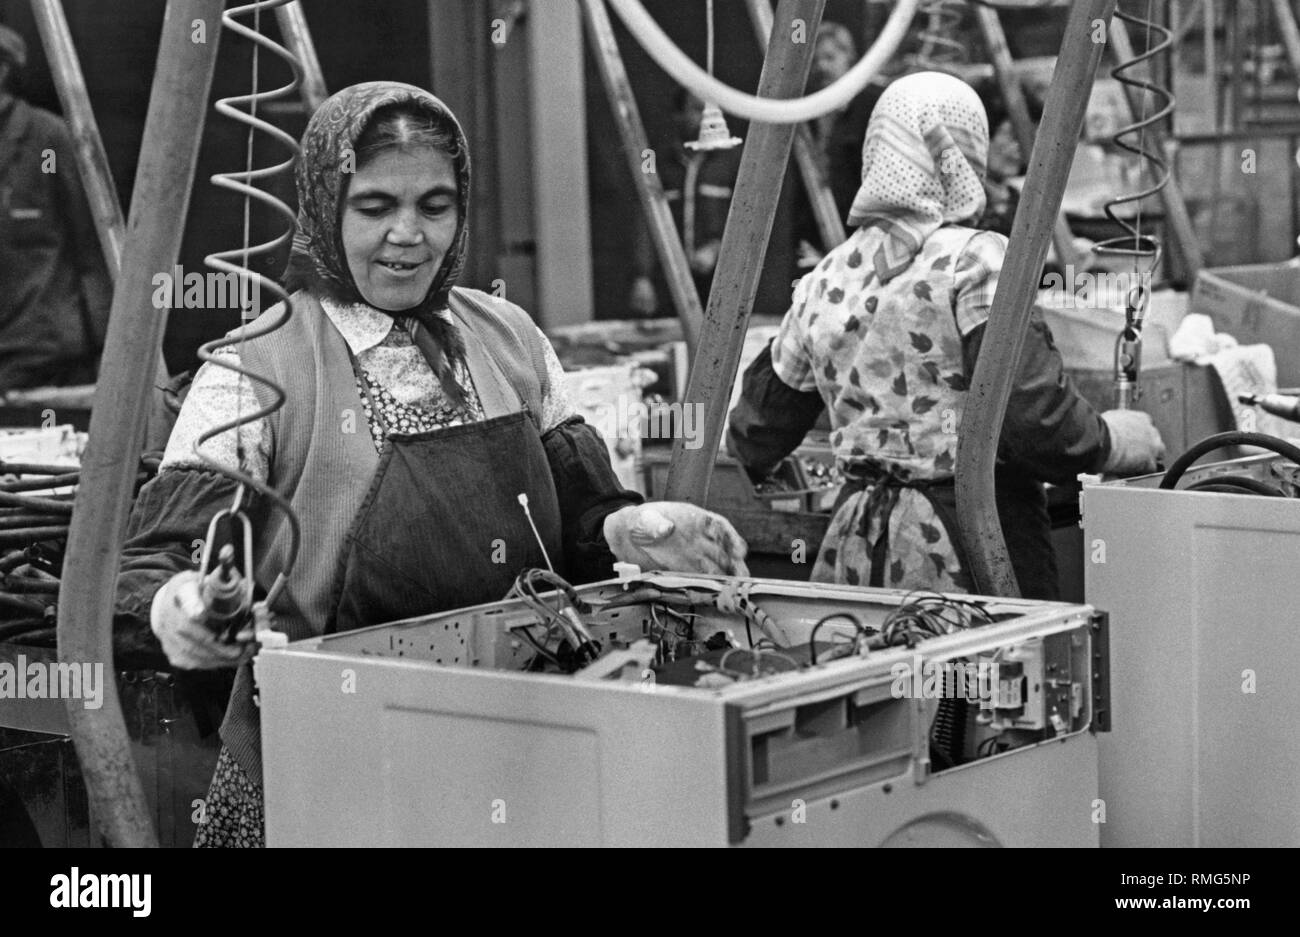 Two migrants with Turkish roots at their workplace on the assembly line of the company Miele. Stock Photo